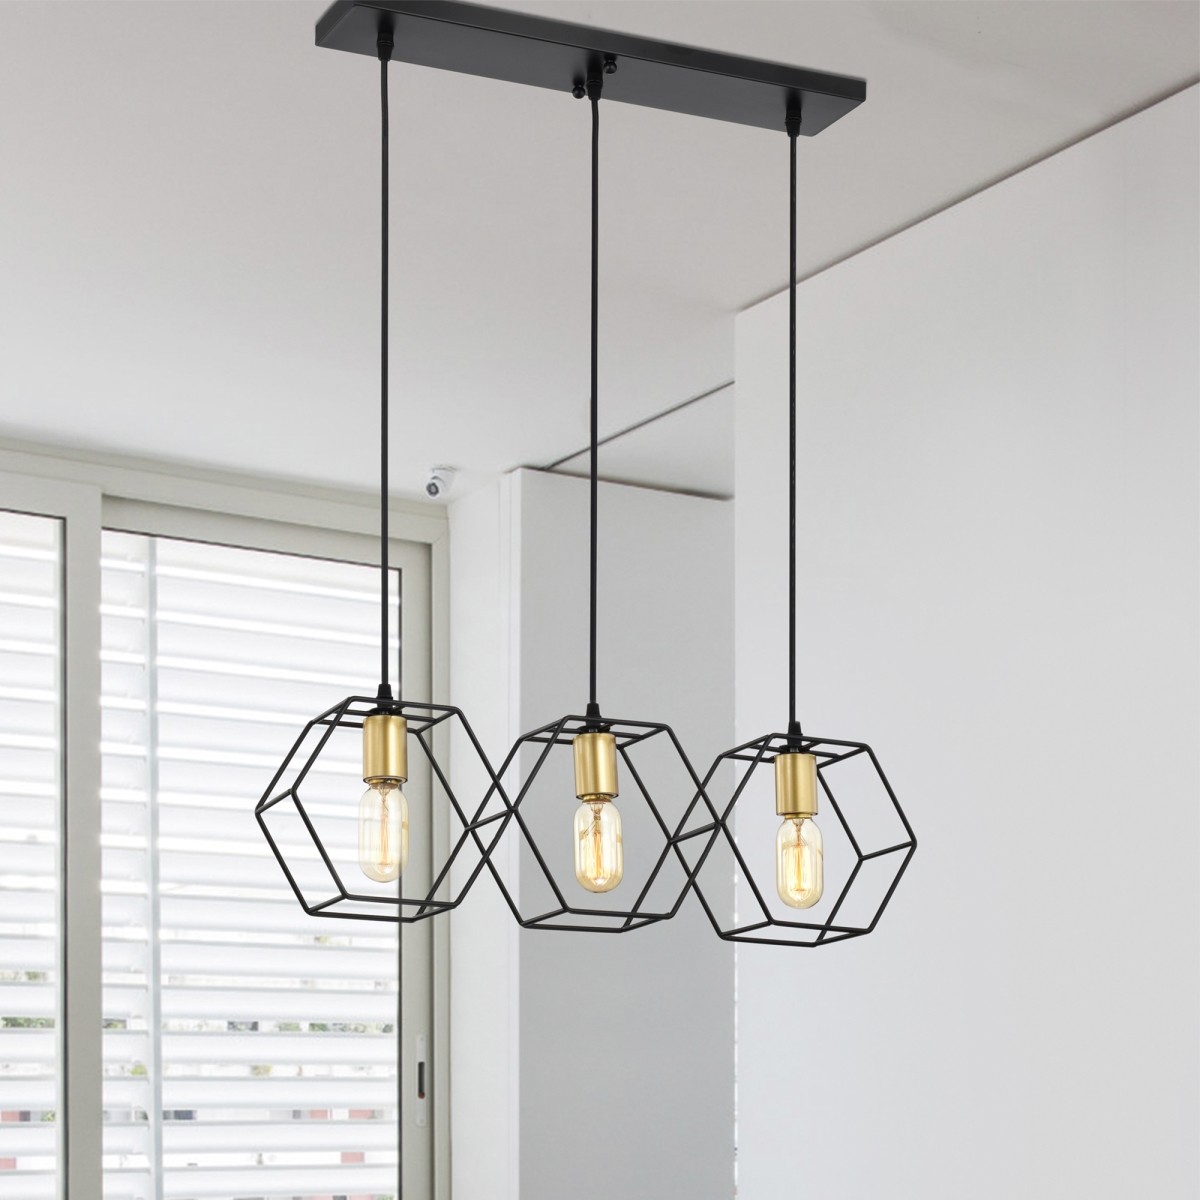 Horatia 24 in. 3-Light Indoor Matte Black and Satin Gold Finish Chandelier with Light Kit